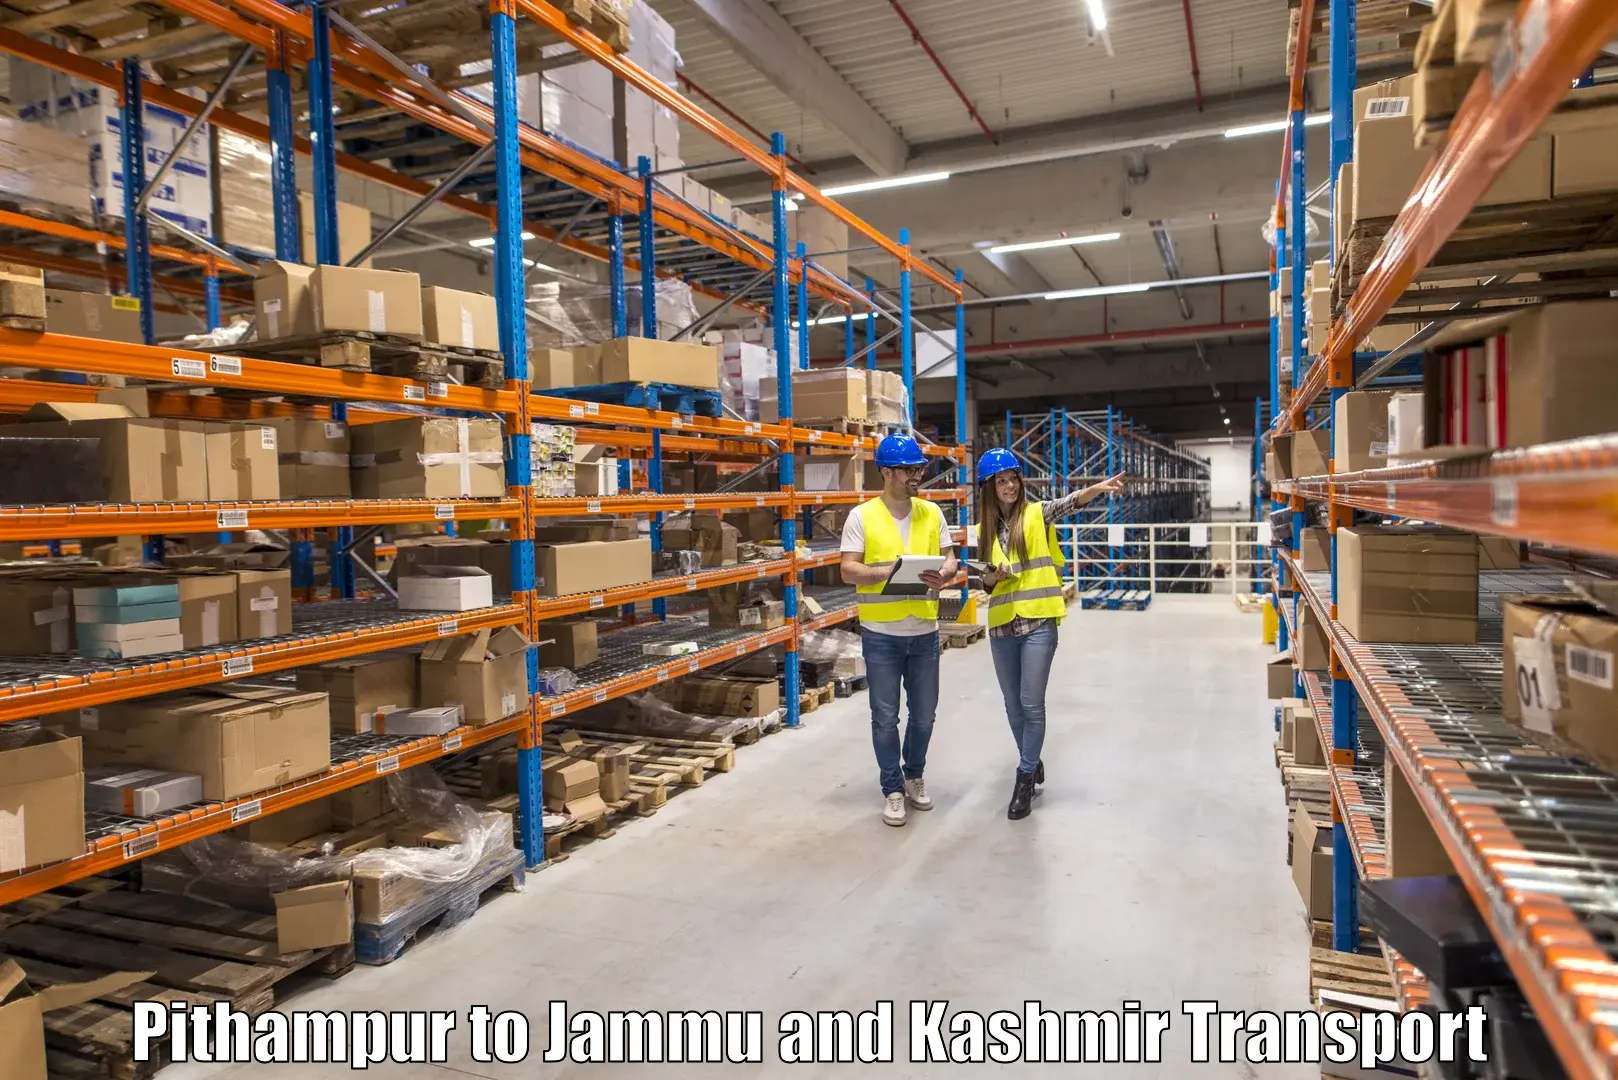 Cargo train transport services Pithampur to Jammu and Kashmir